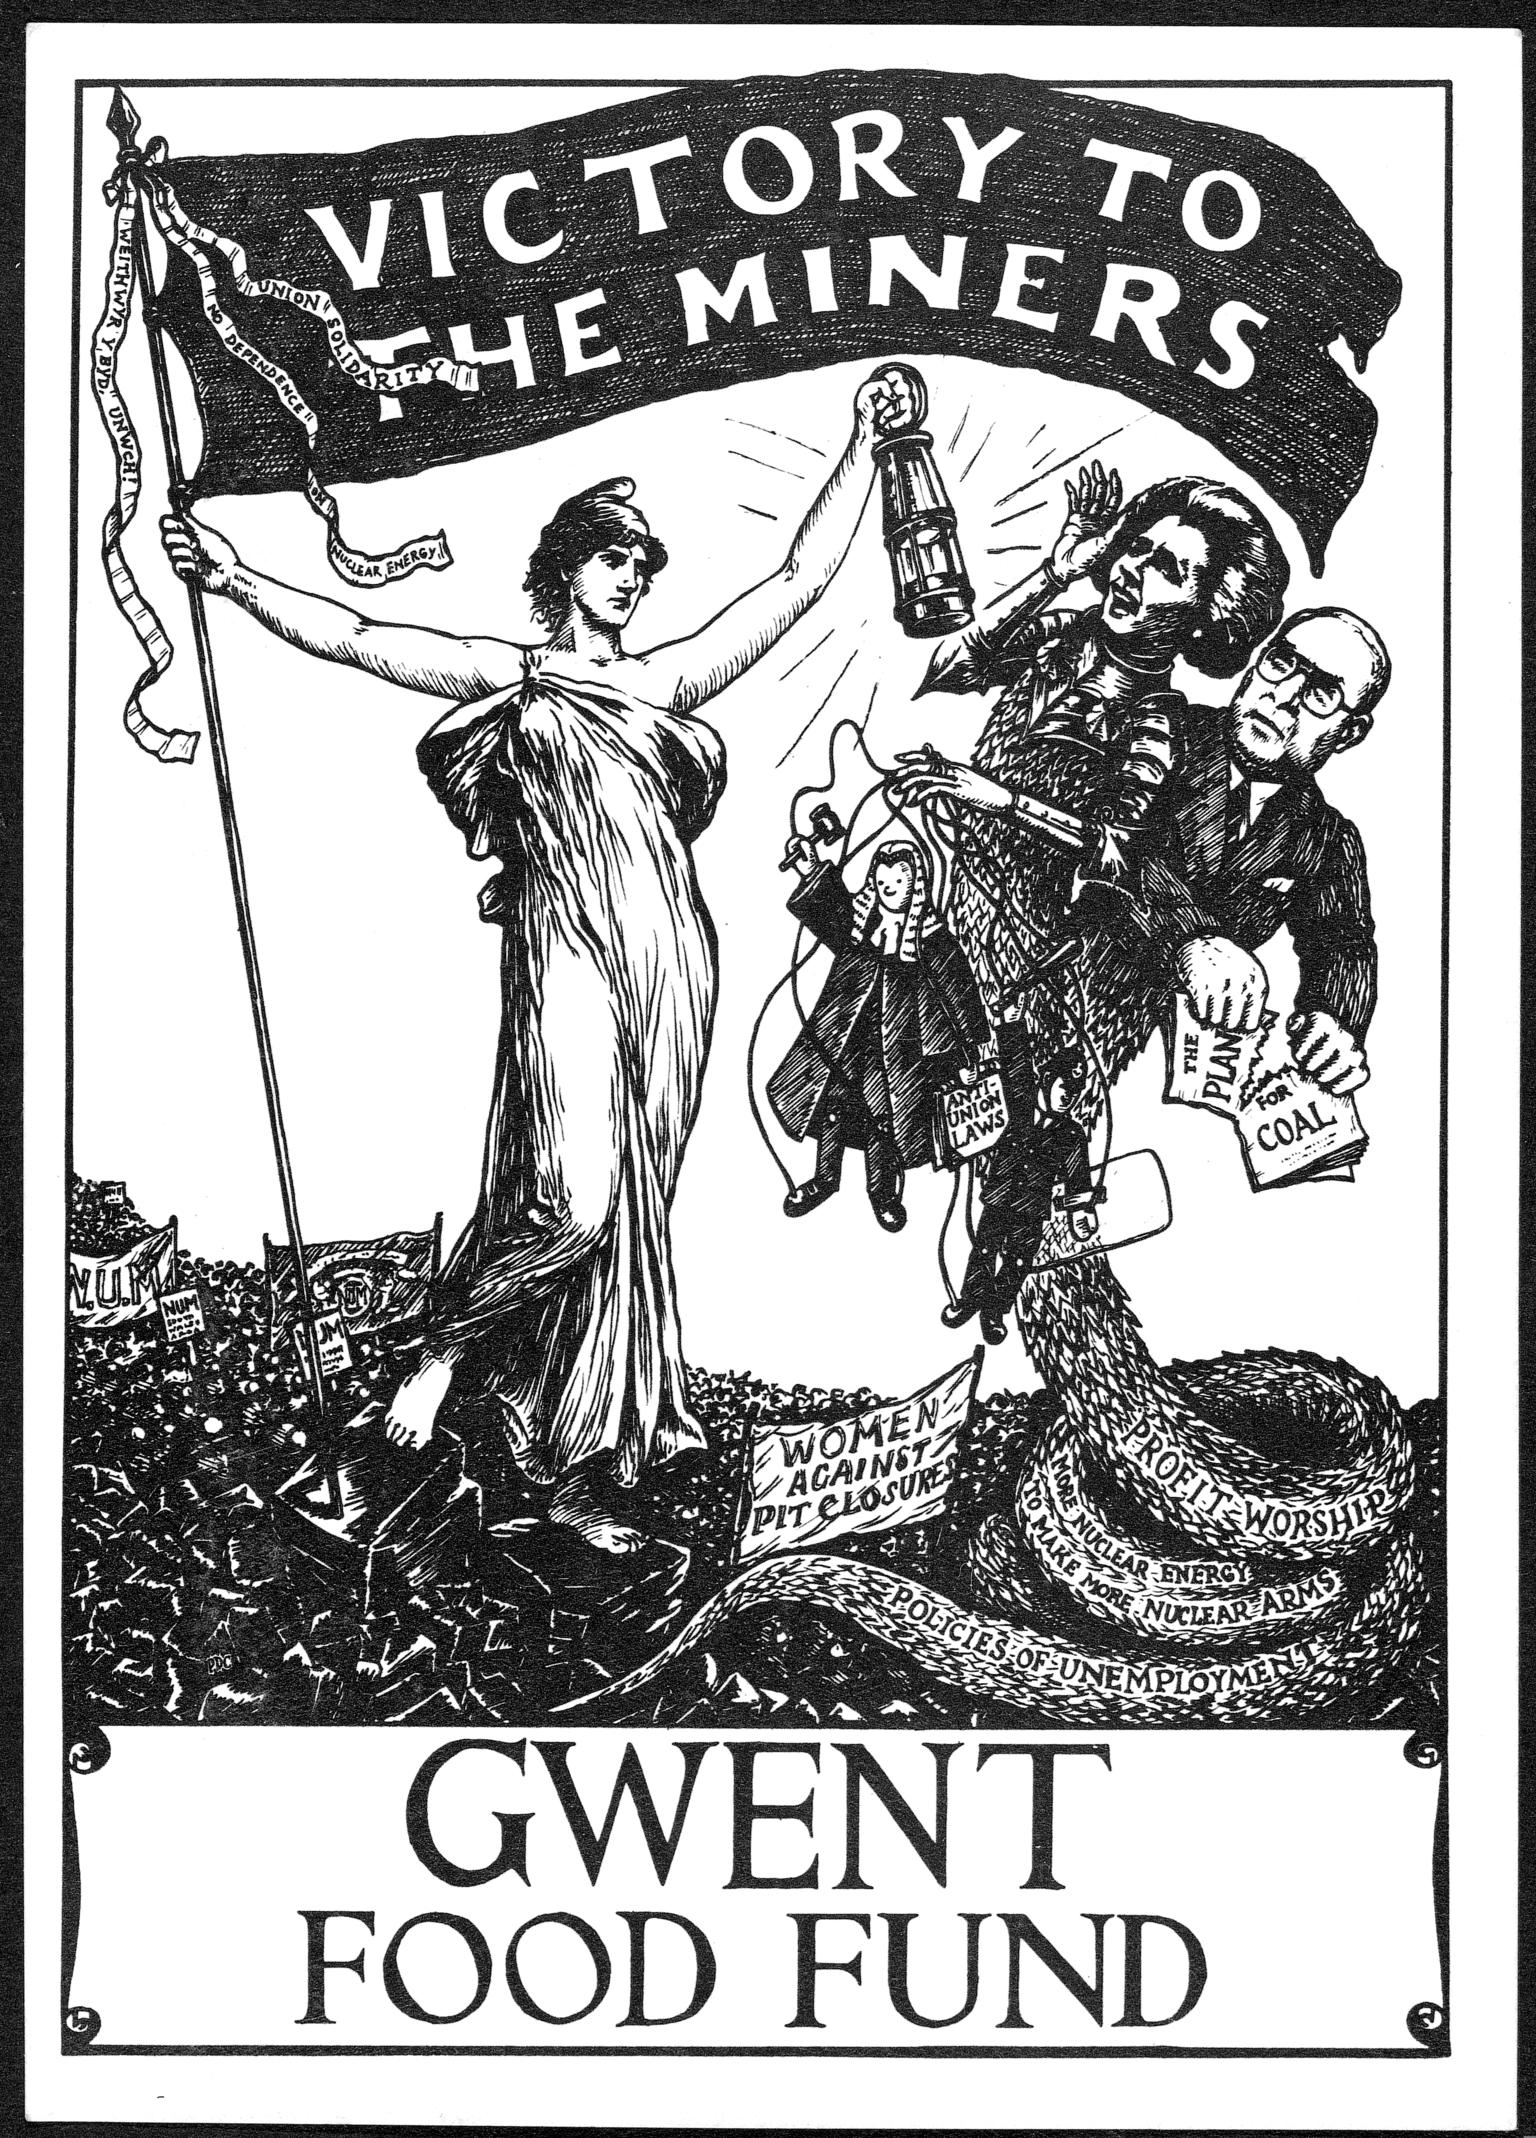 Victory to the Miners. Gwent Food Fund (postcard)